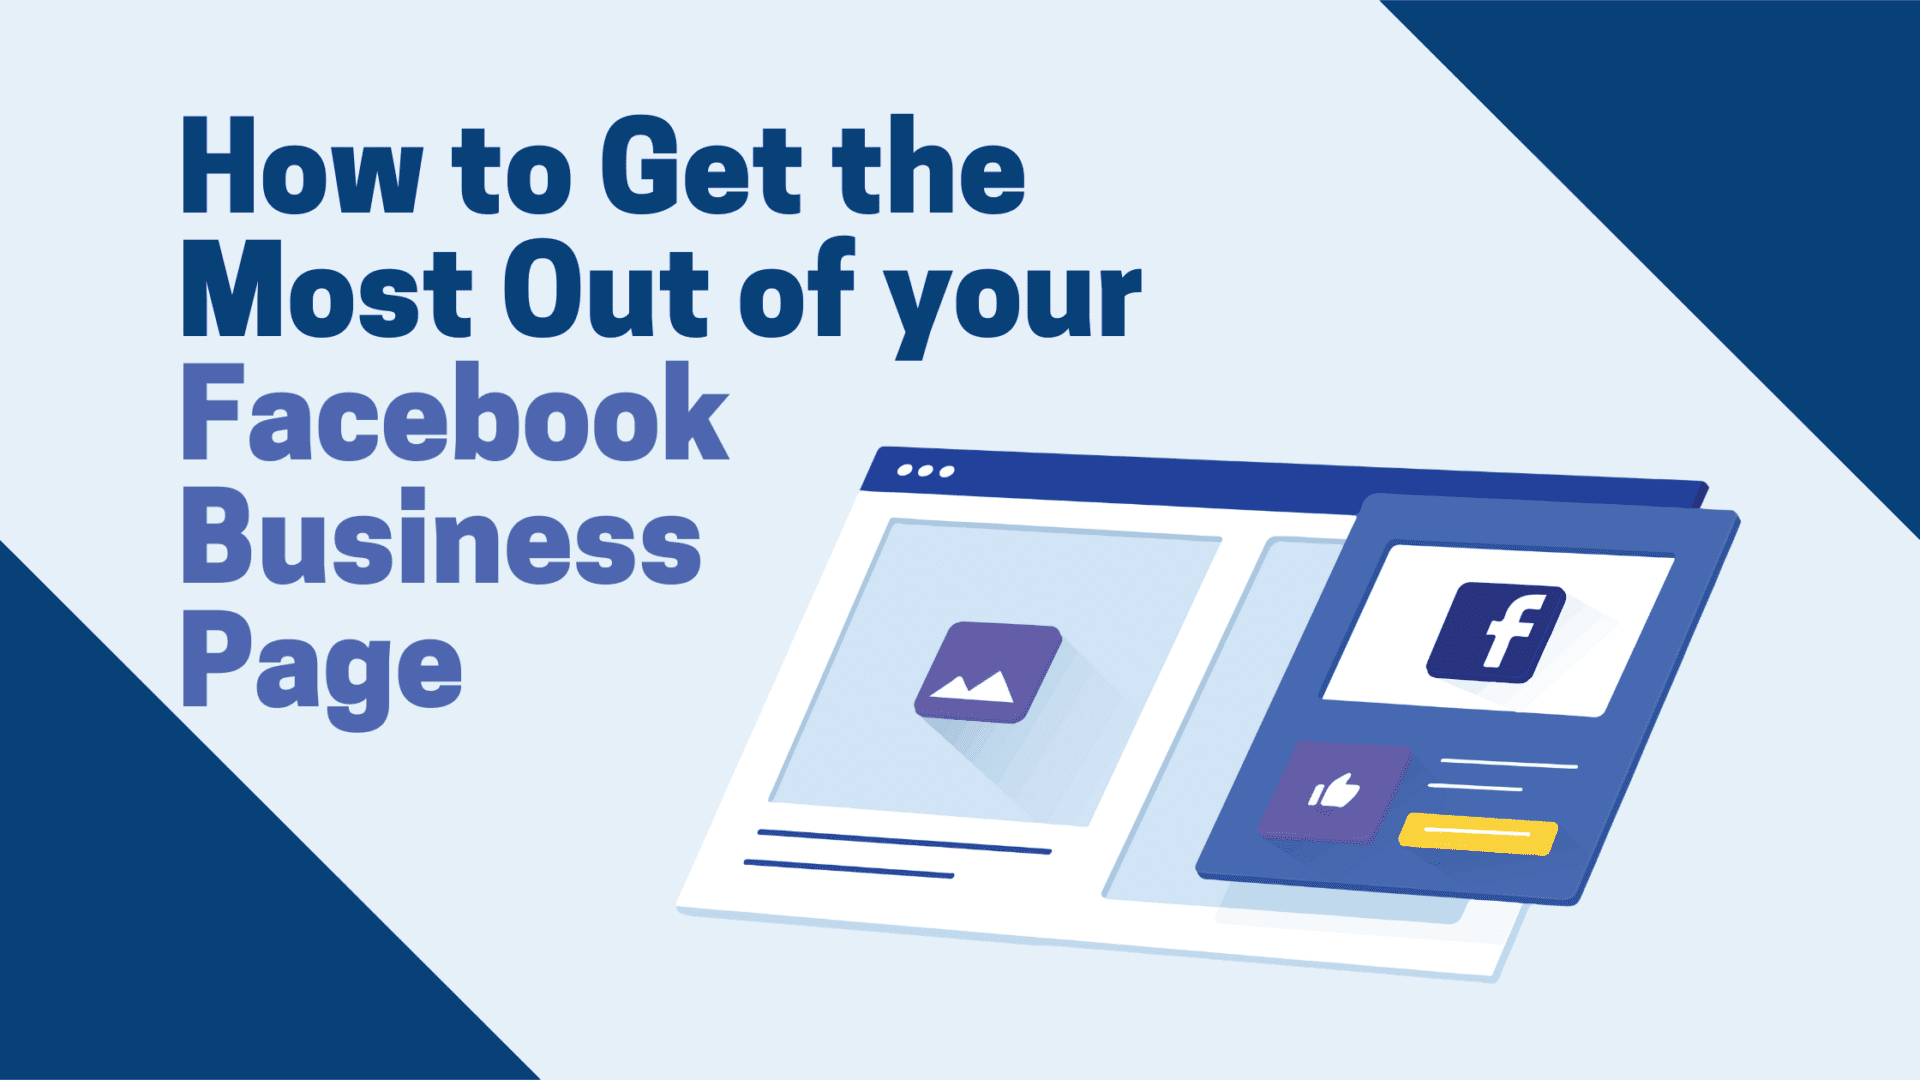 How to Get the Most Out of your Facebook Business Page